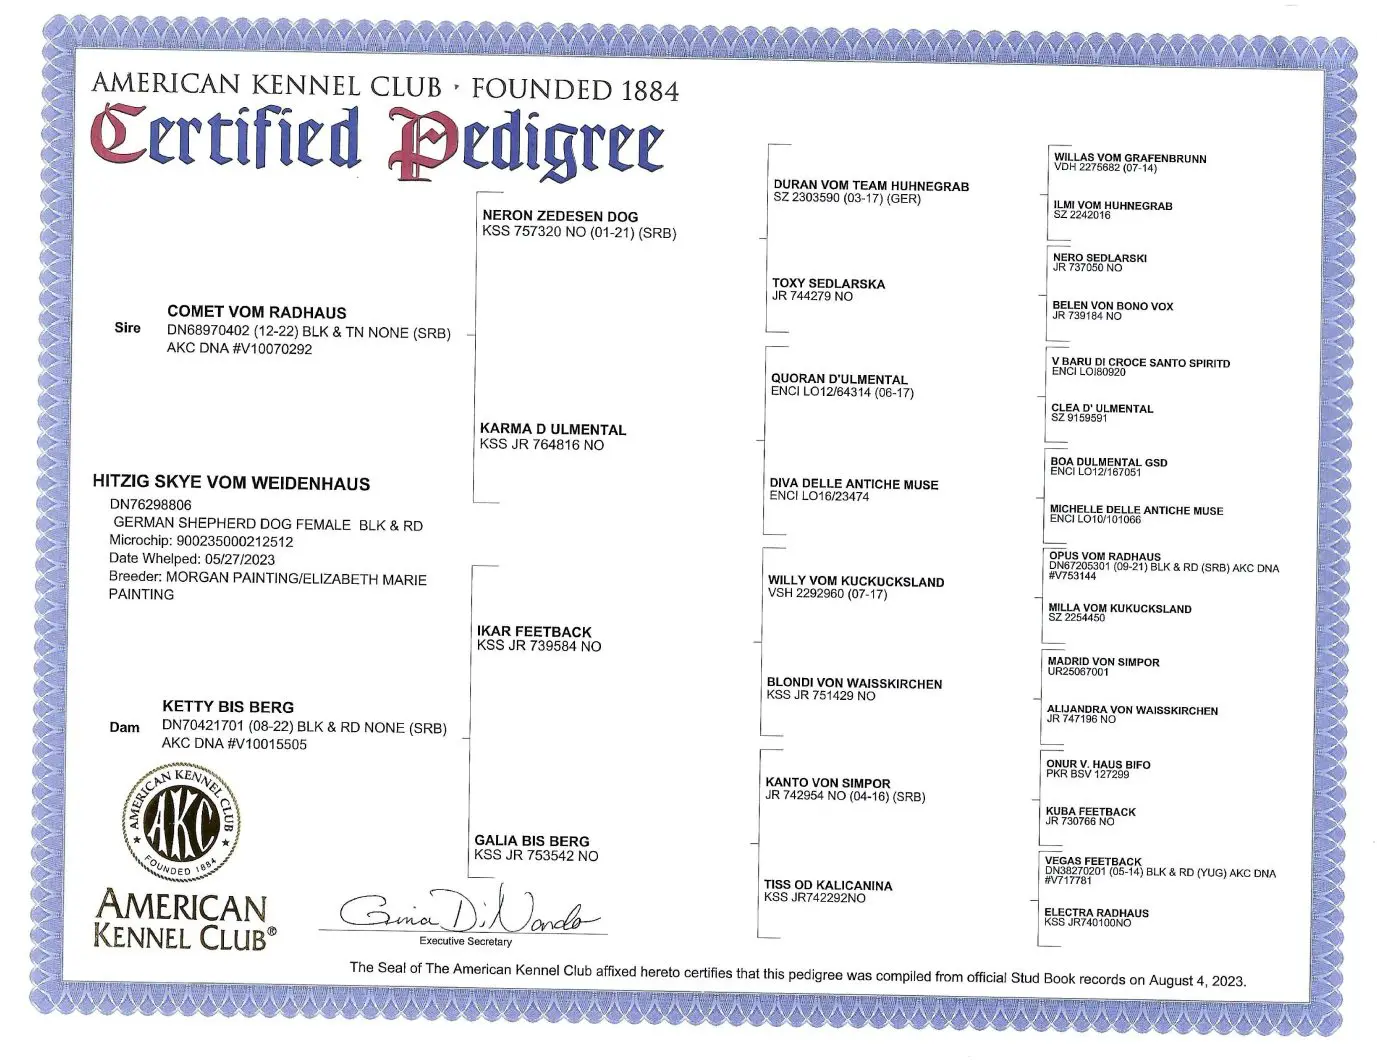 A certificate of registration for an american kennel club certified pedigree.